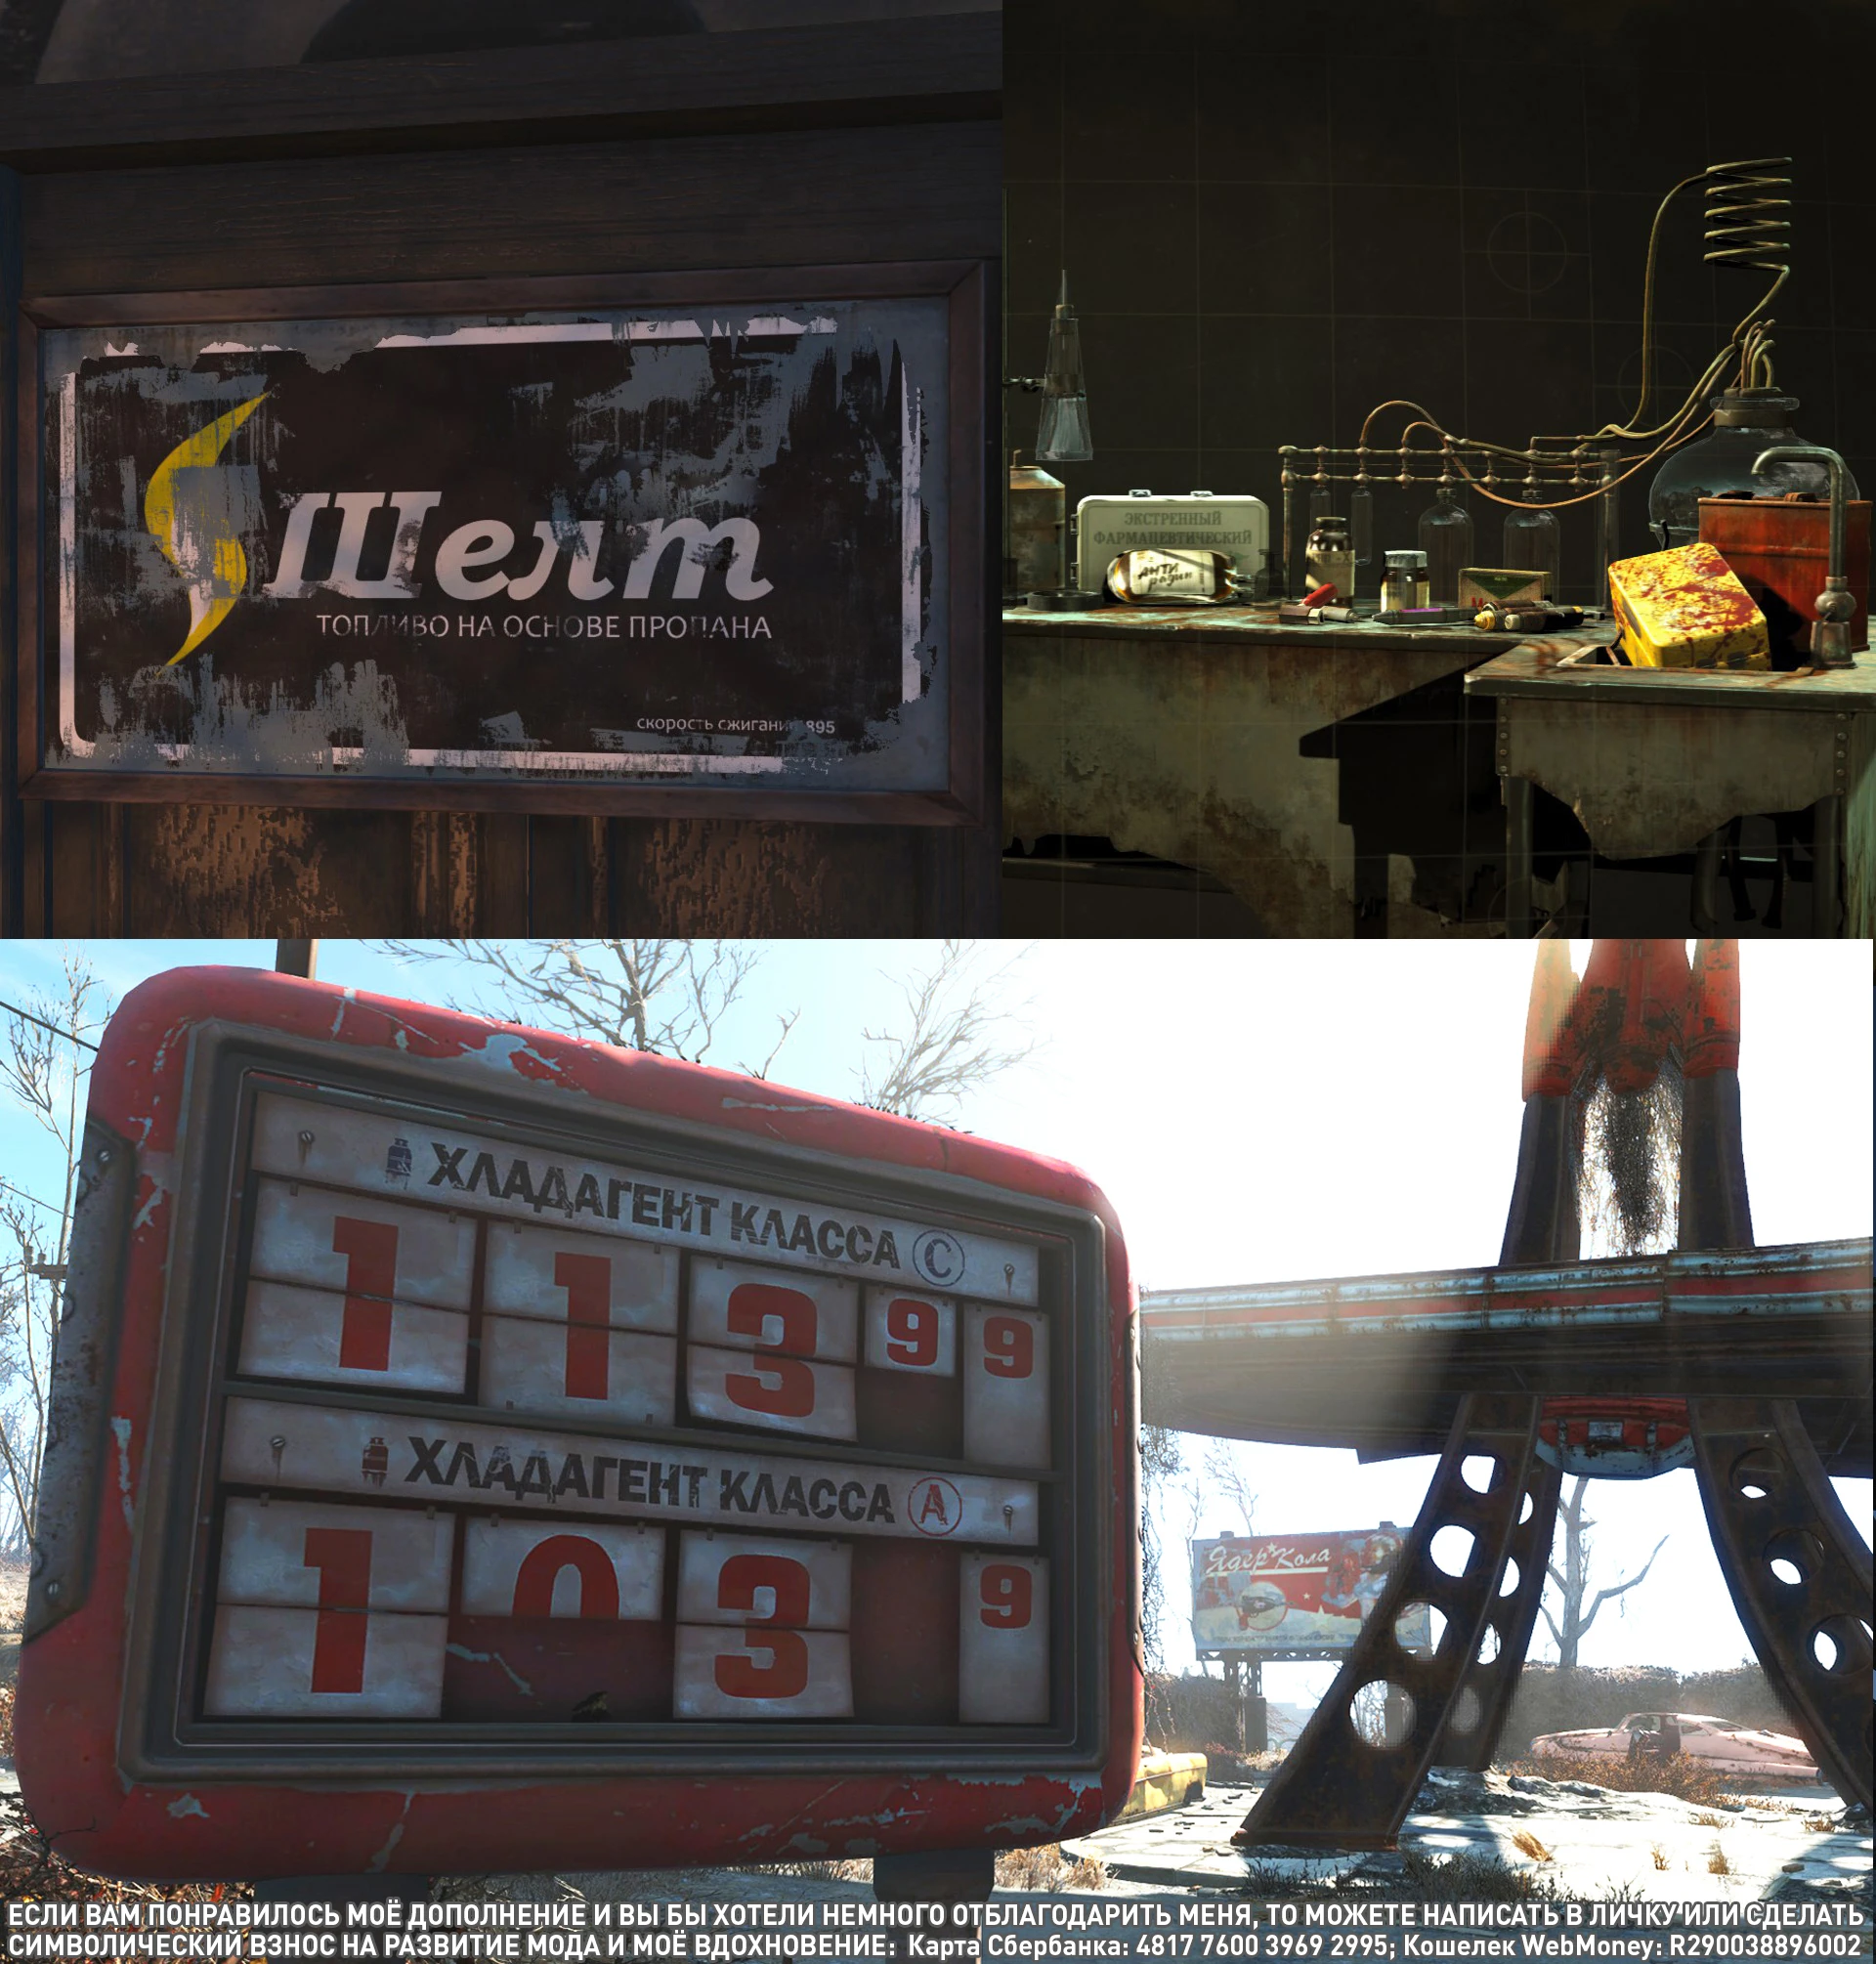 Generator textures from hiro fallout 4 фото 1